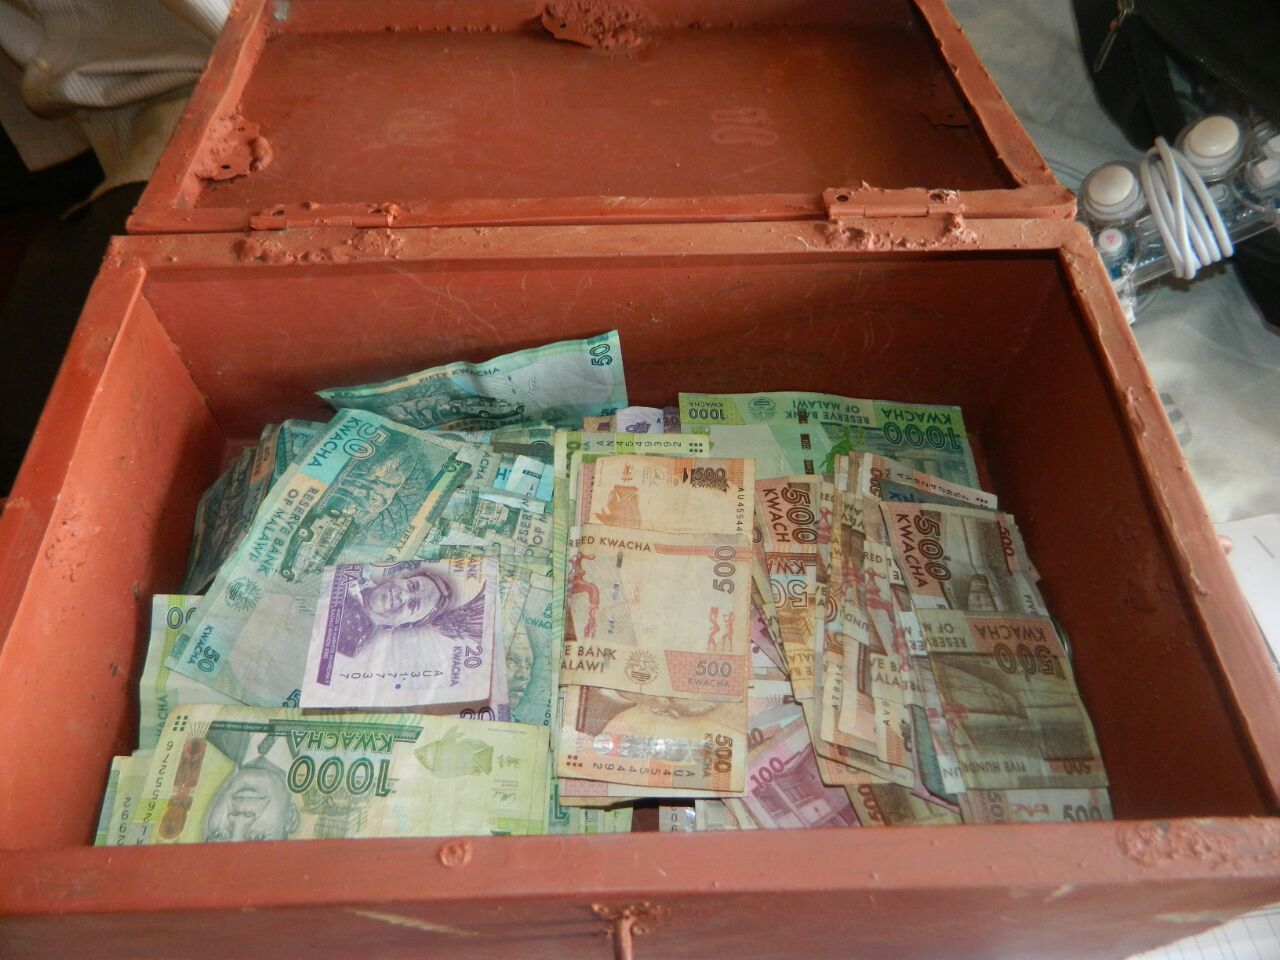 A red box full of money. This signifies the work done by the Village Savings Ministries at Namikango